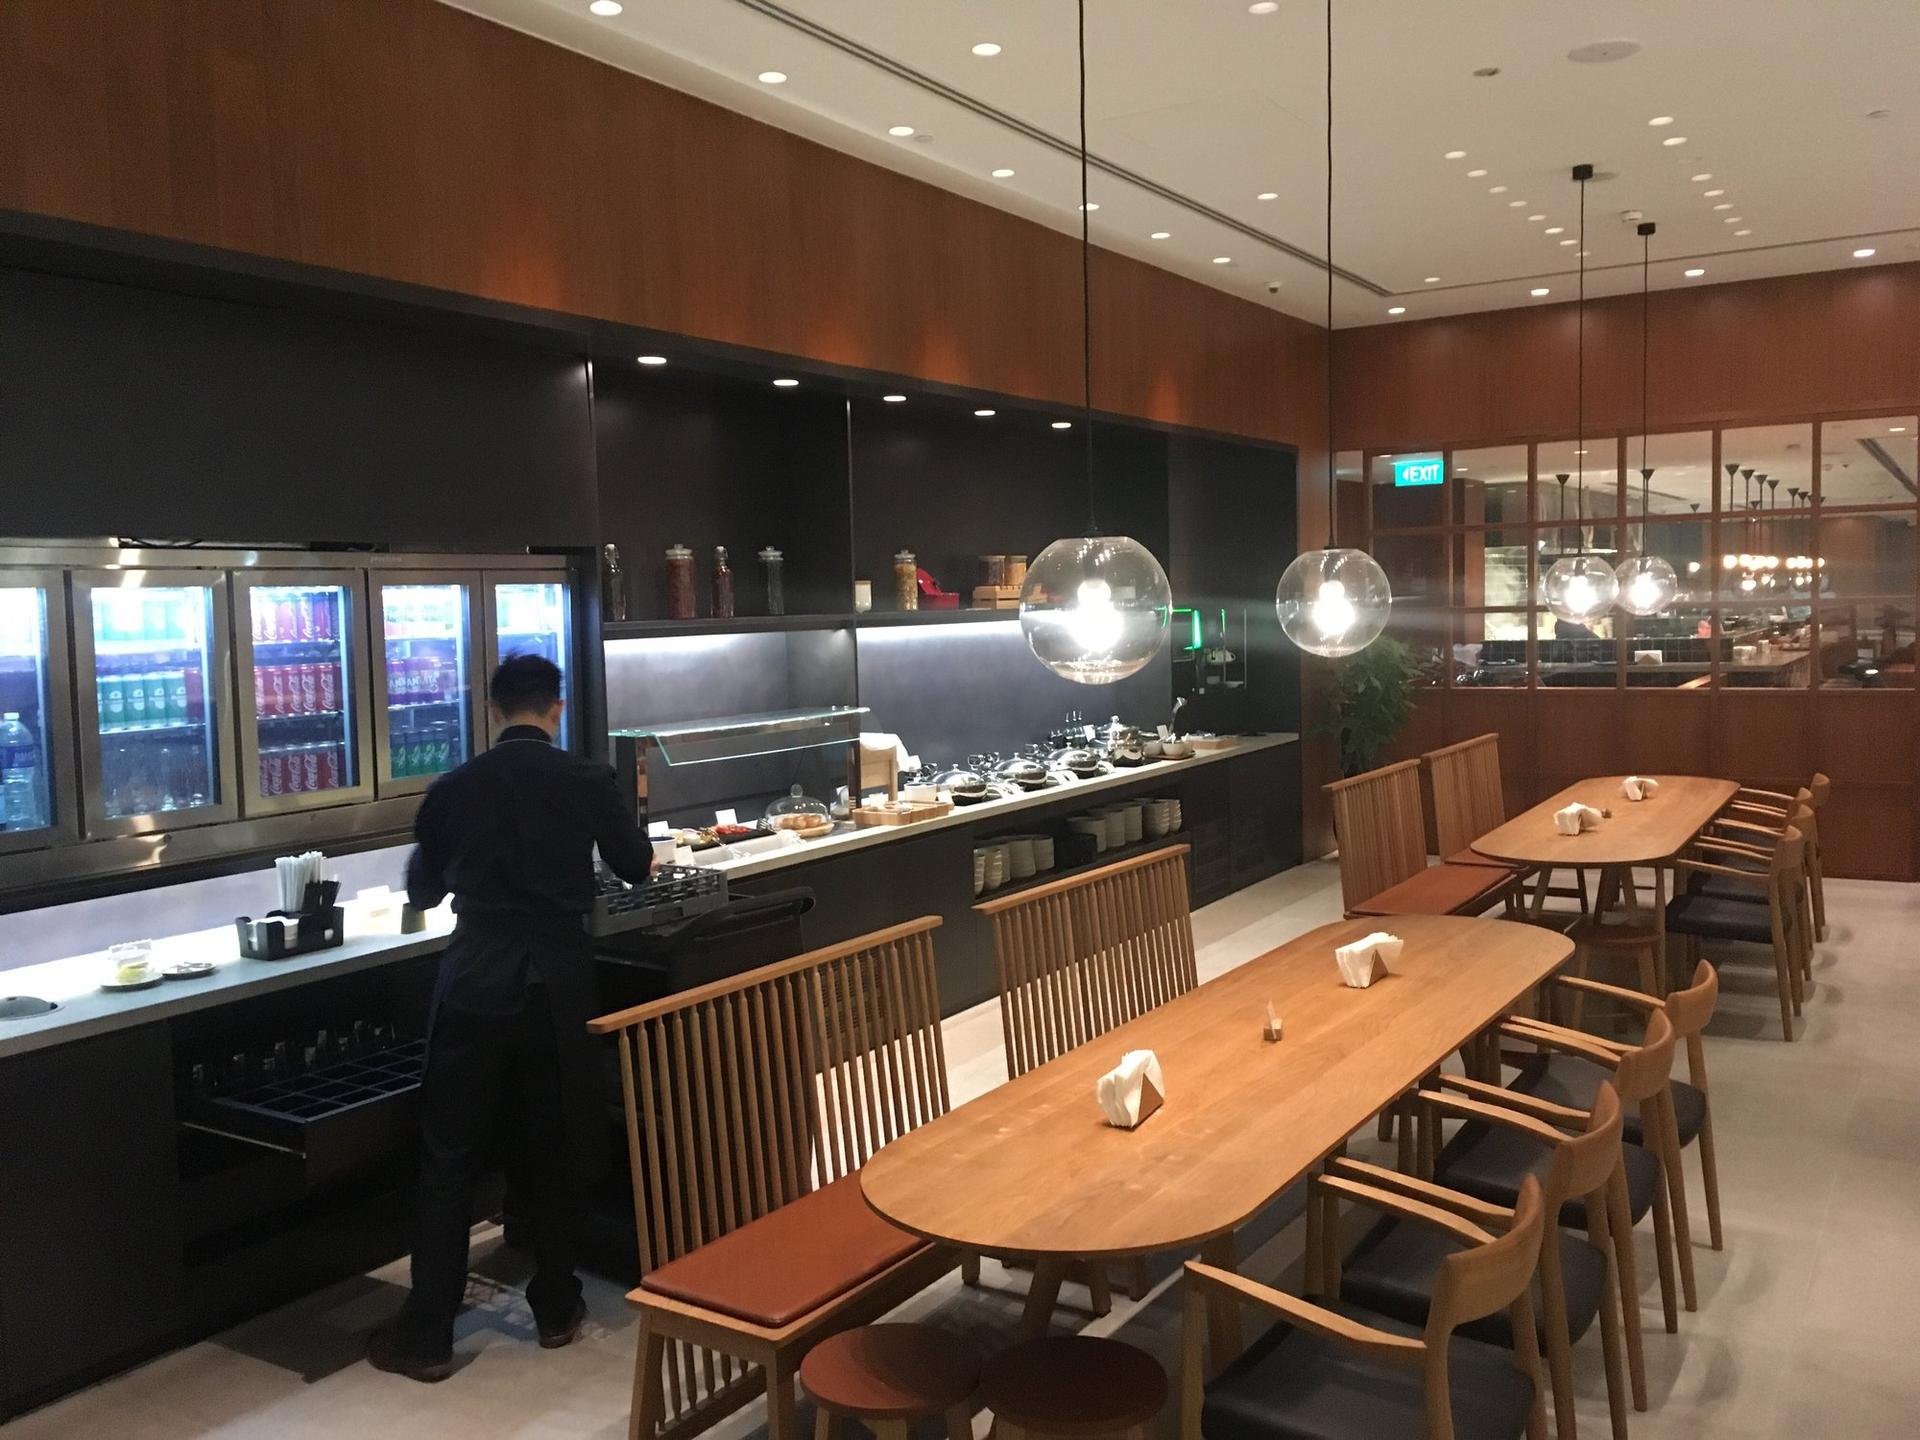 Cathay Pacific Lounge image 57 of 60